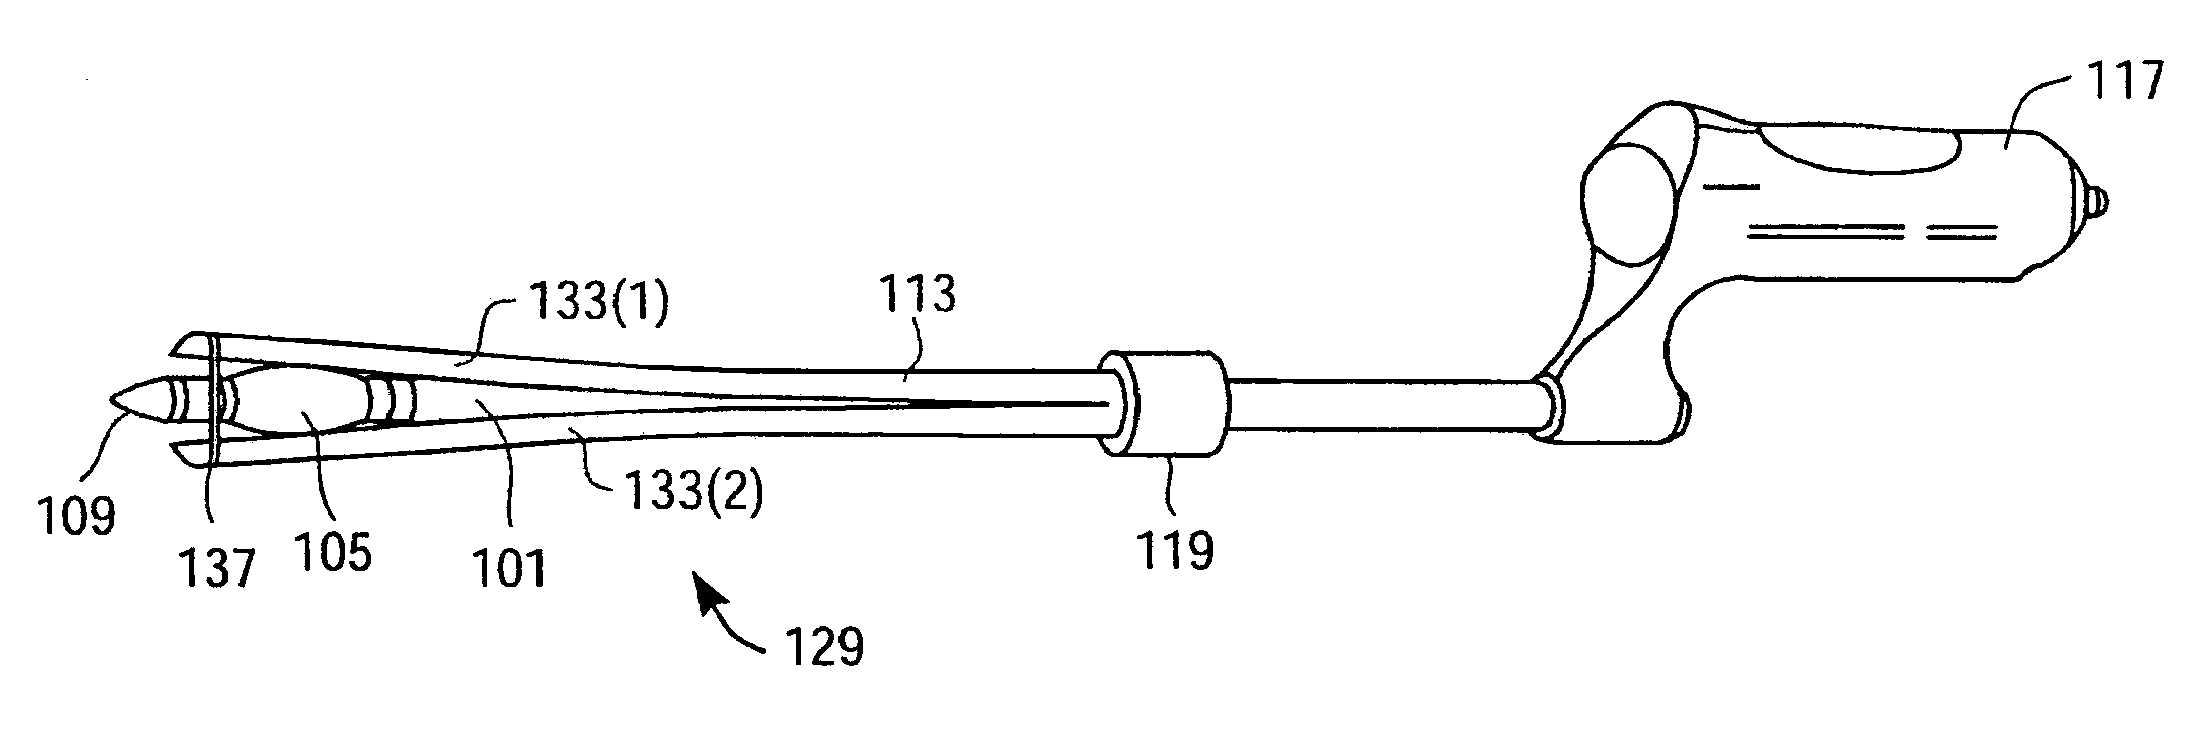 Apparatus and Method for Endoscopic Surgical Procedures